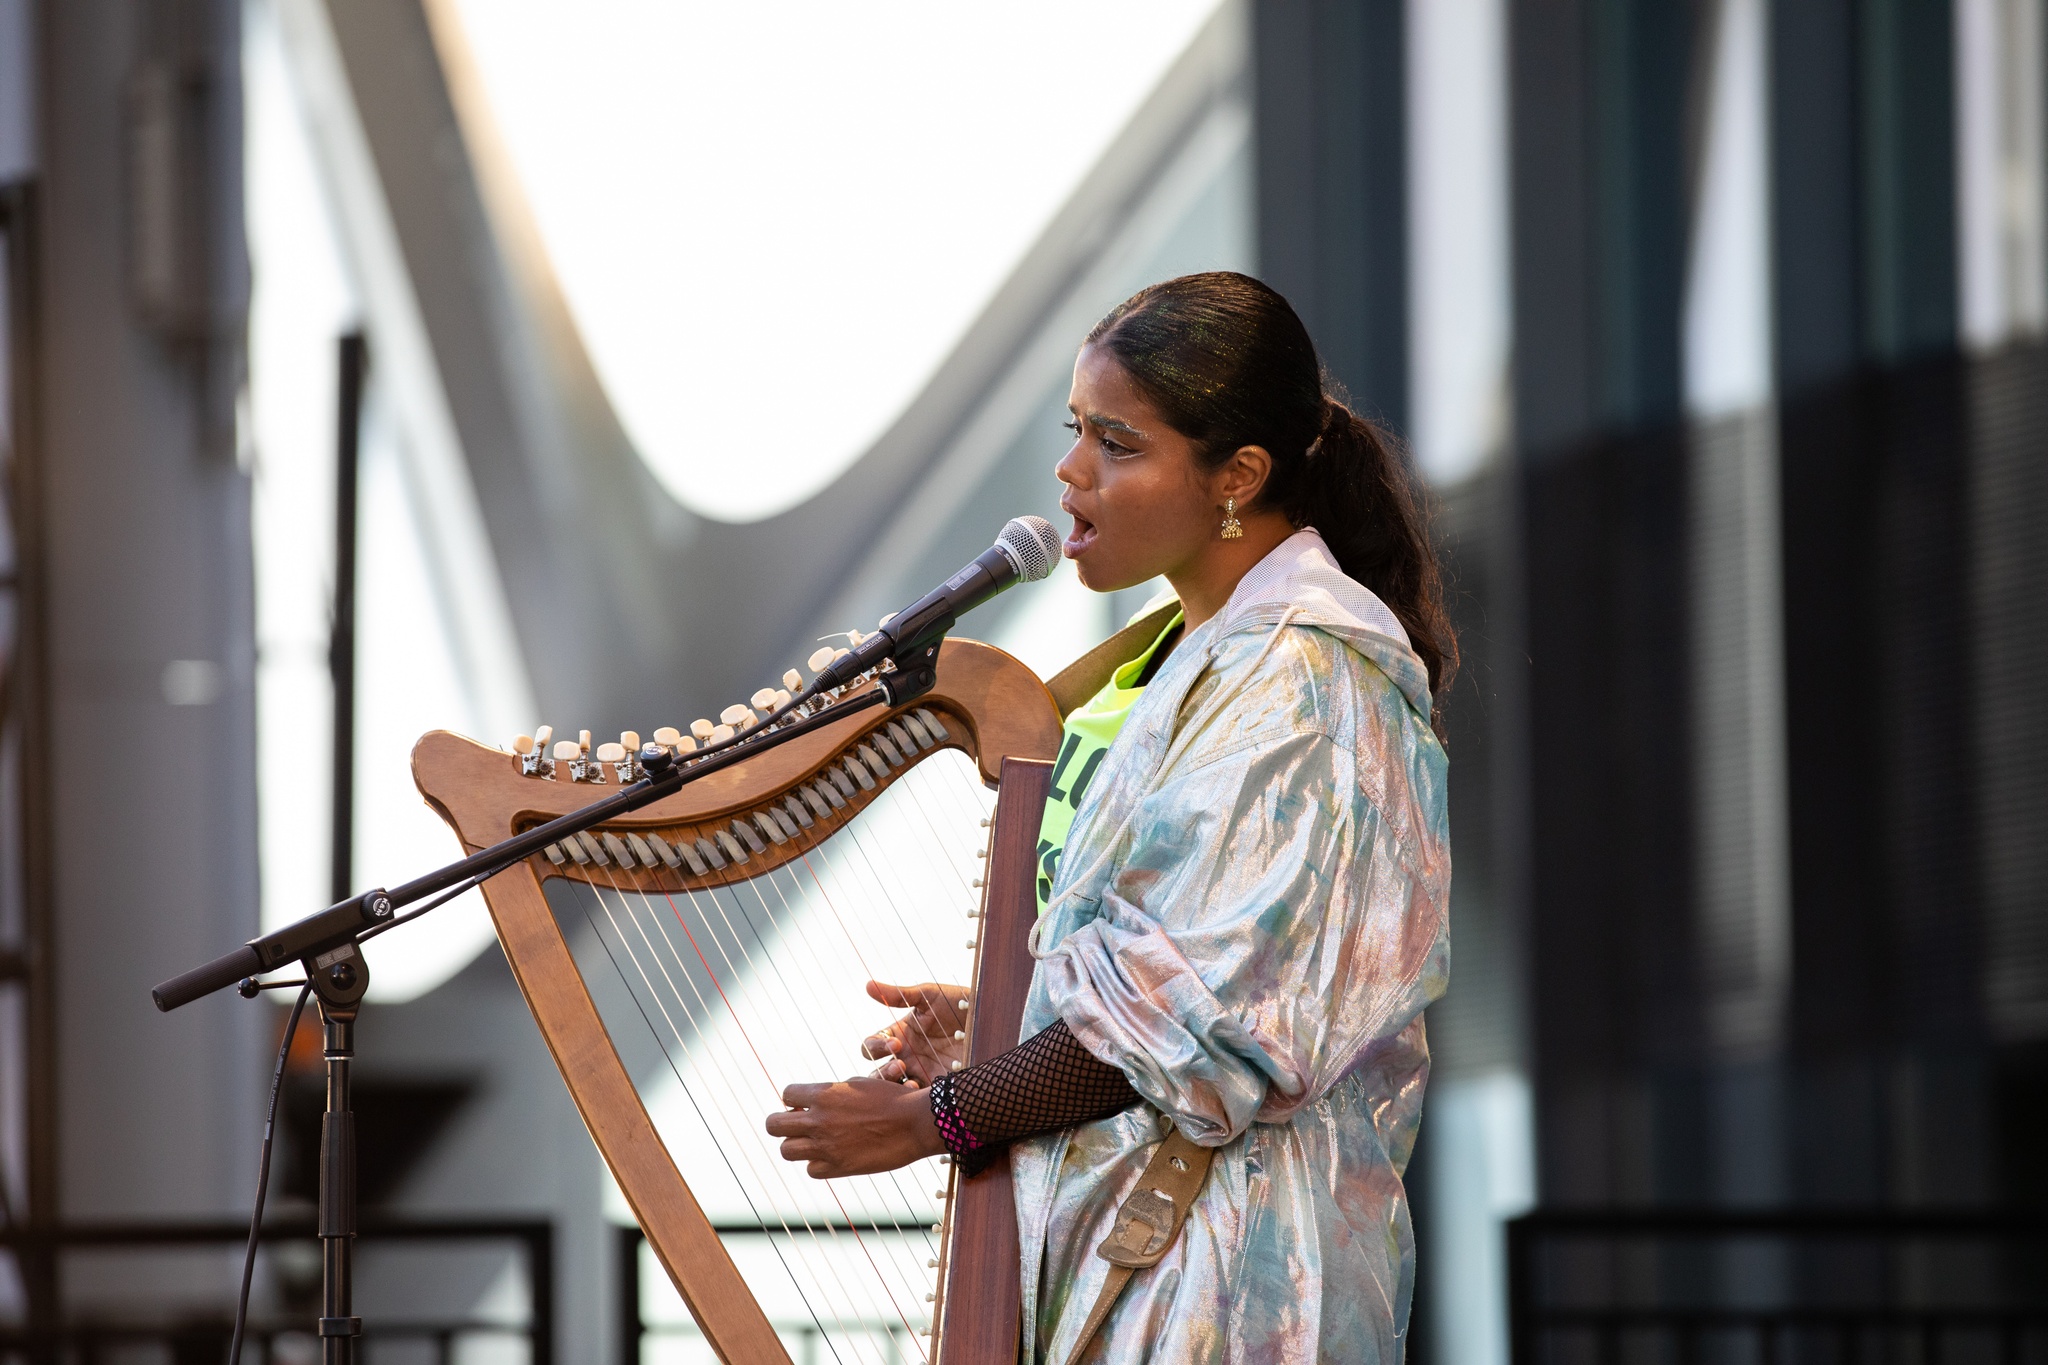 Performer singing and playing harp on outdoor stage.